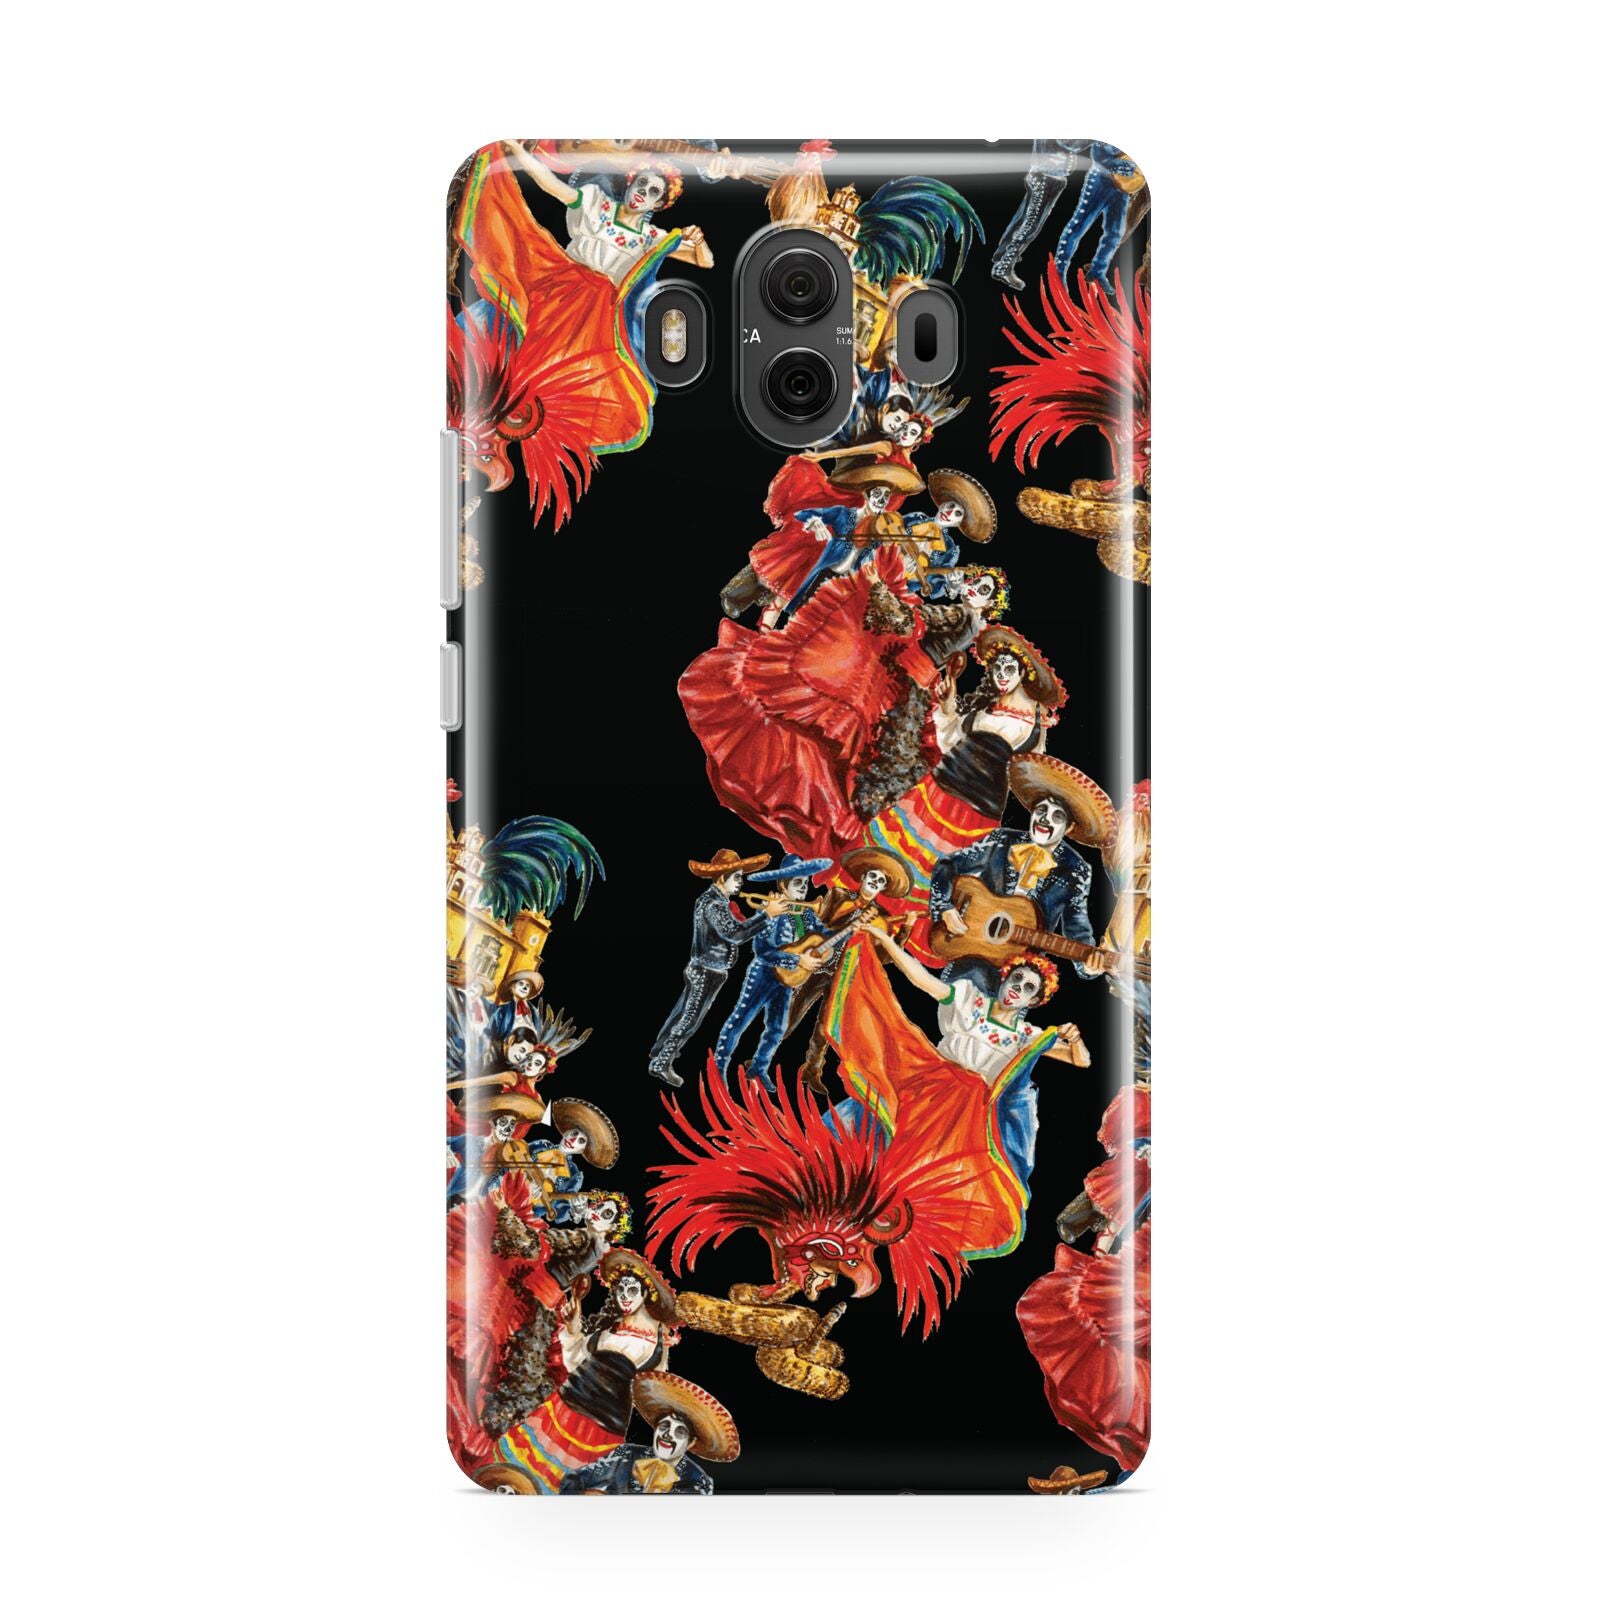 Day of the Dead Festival Huawei Mate 10 Protective Phone Case